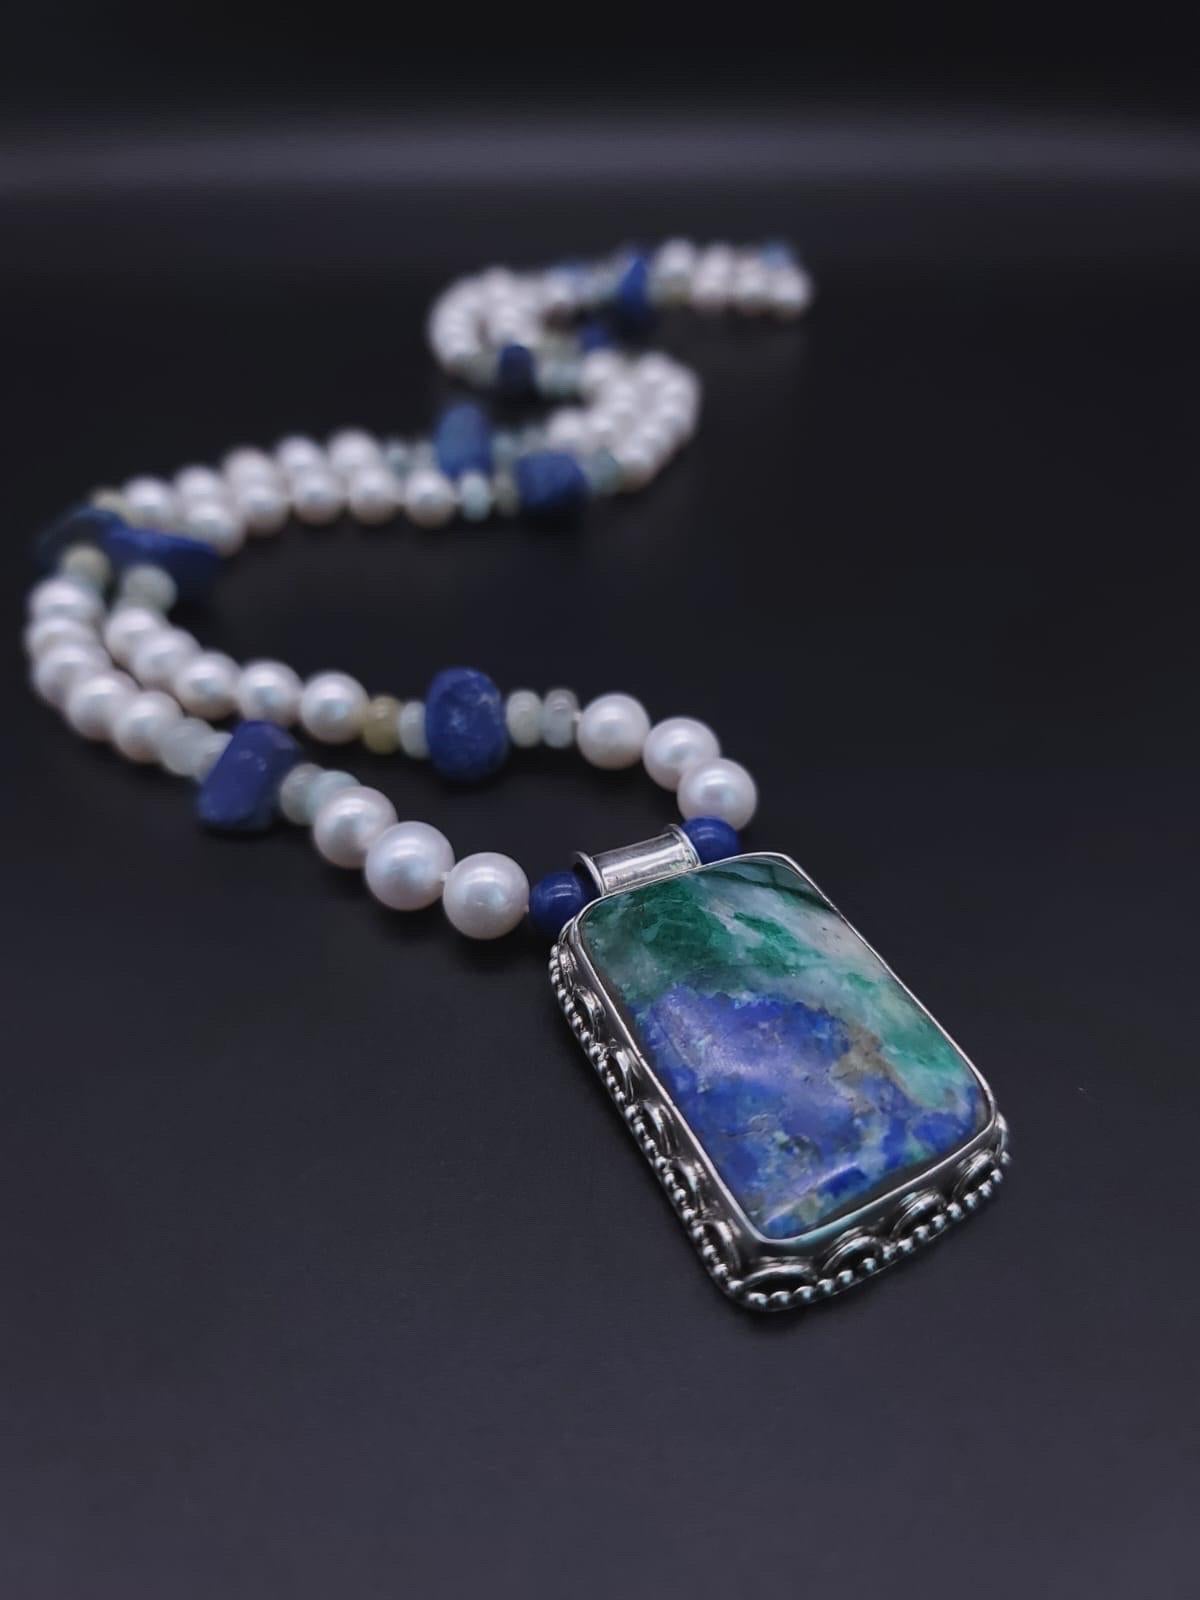 A.Jeschel Stunning Chrysocolla pendant necklace For Sale 10